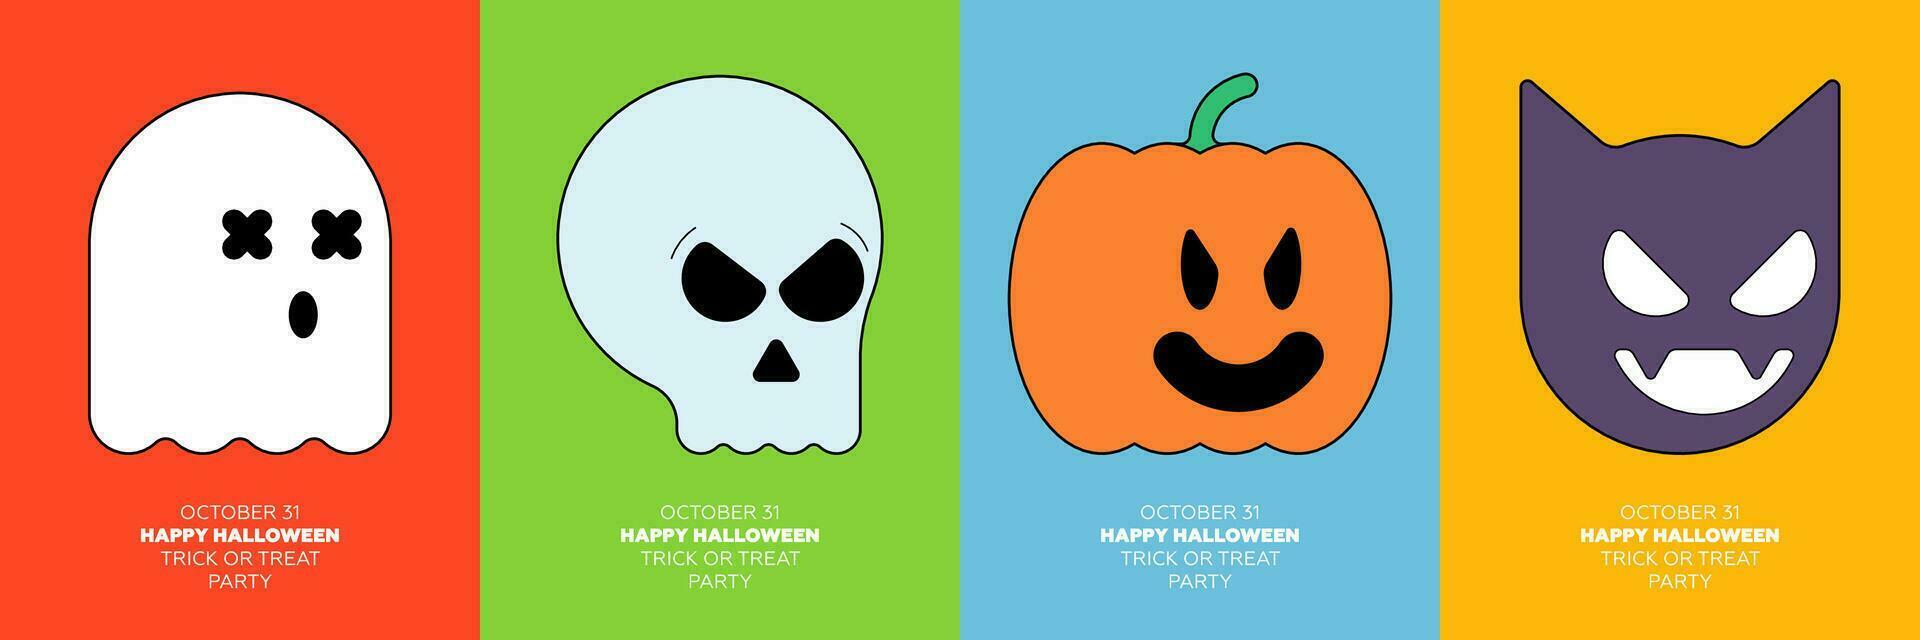 Happy Halloween trick or treat party poster set with geometric characters. October 31 holiday event. Pumpkin, skull, bat and ghost minimalistic graphic mascots on colourful cover. Trendy vector print